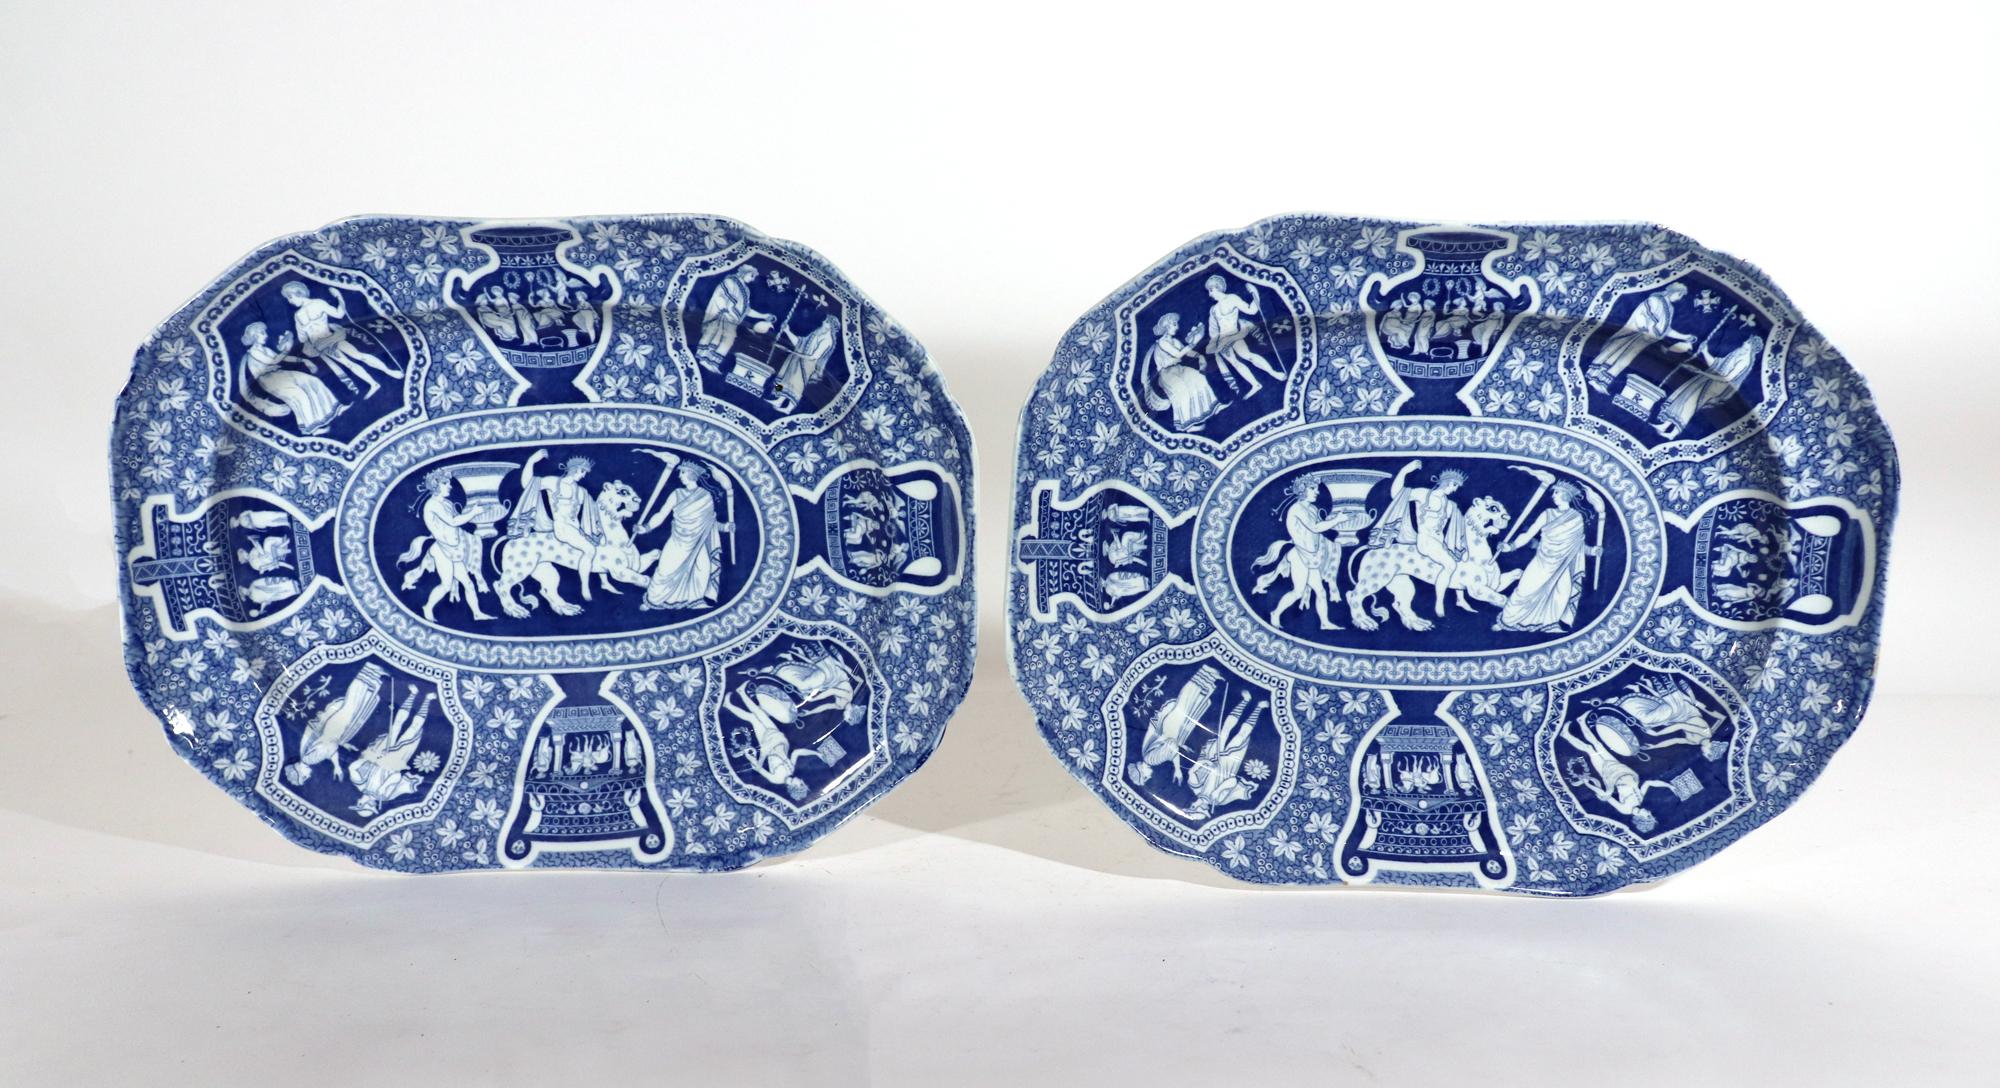 Spode pottery neoclassical Greek pattern blue pair of dishes,
Bacchus Mounted on a Panther,
Early-19th century 

The Spode Greek pattern pottery shaped rectangular dishes with cantered corners are printed in blue with neo-classical scenes on